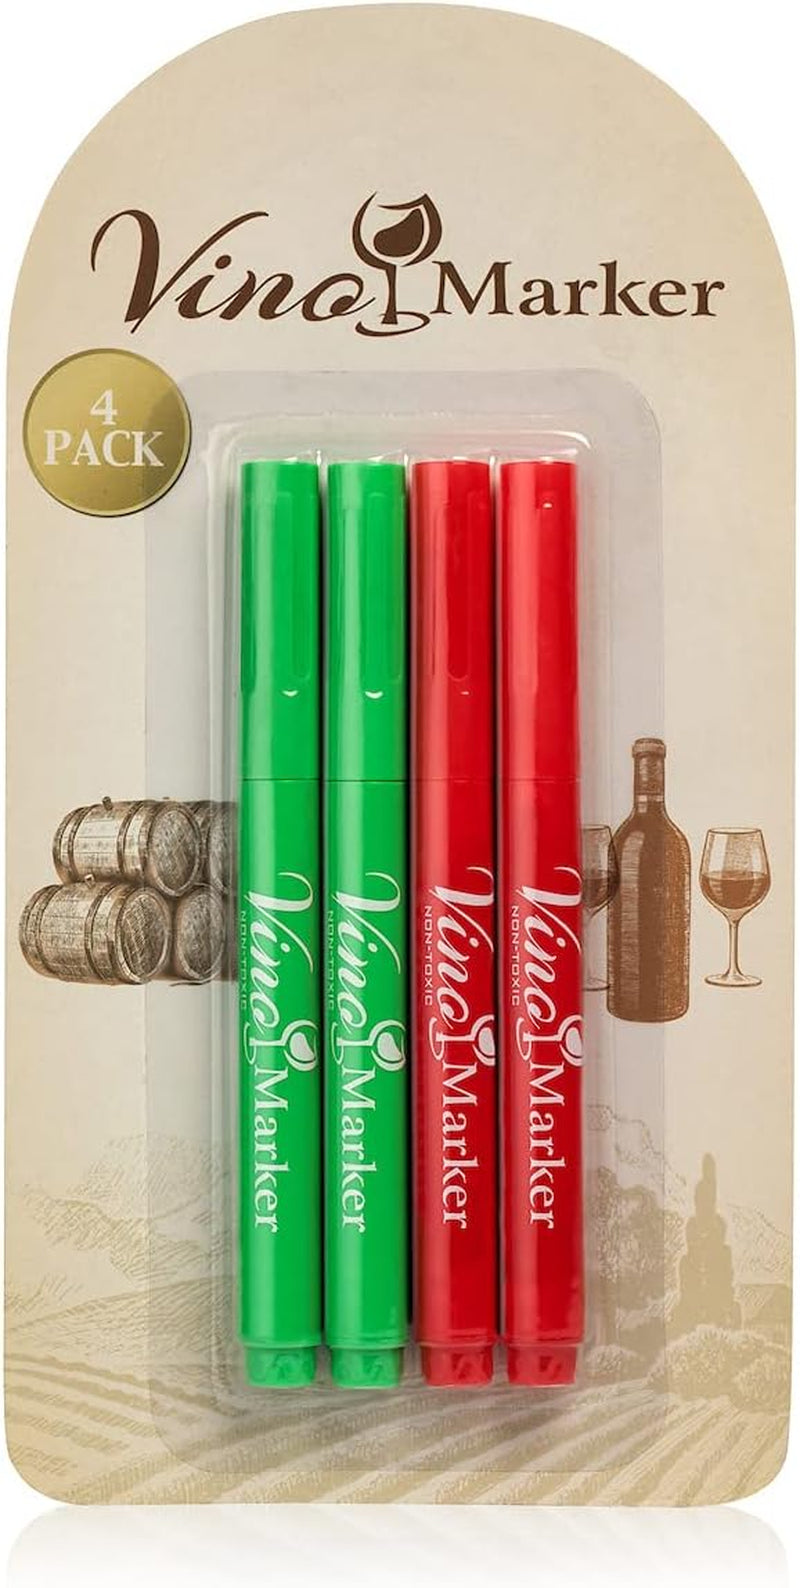 Vino Marker Wine Glass Pens Washable Drink Markers - Perfect For Holiday Parties, Home Bar Accessories, Bachelorette Party Favors, Wine Tasting Decorations or Any Event